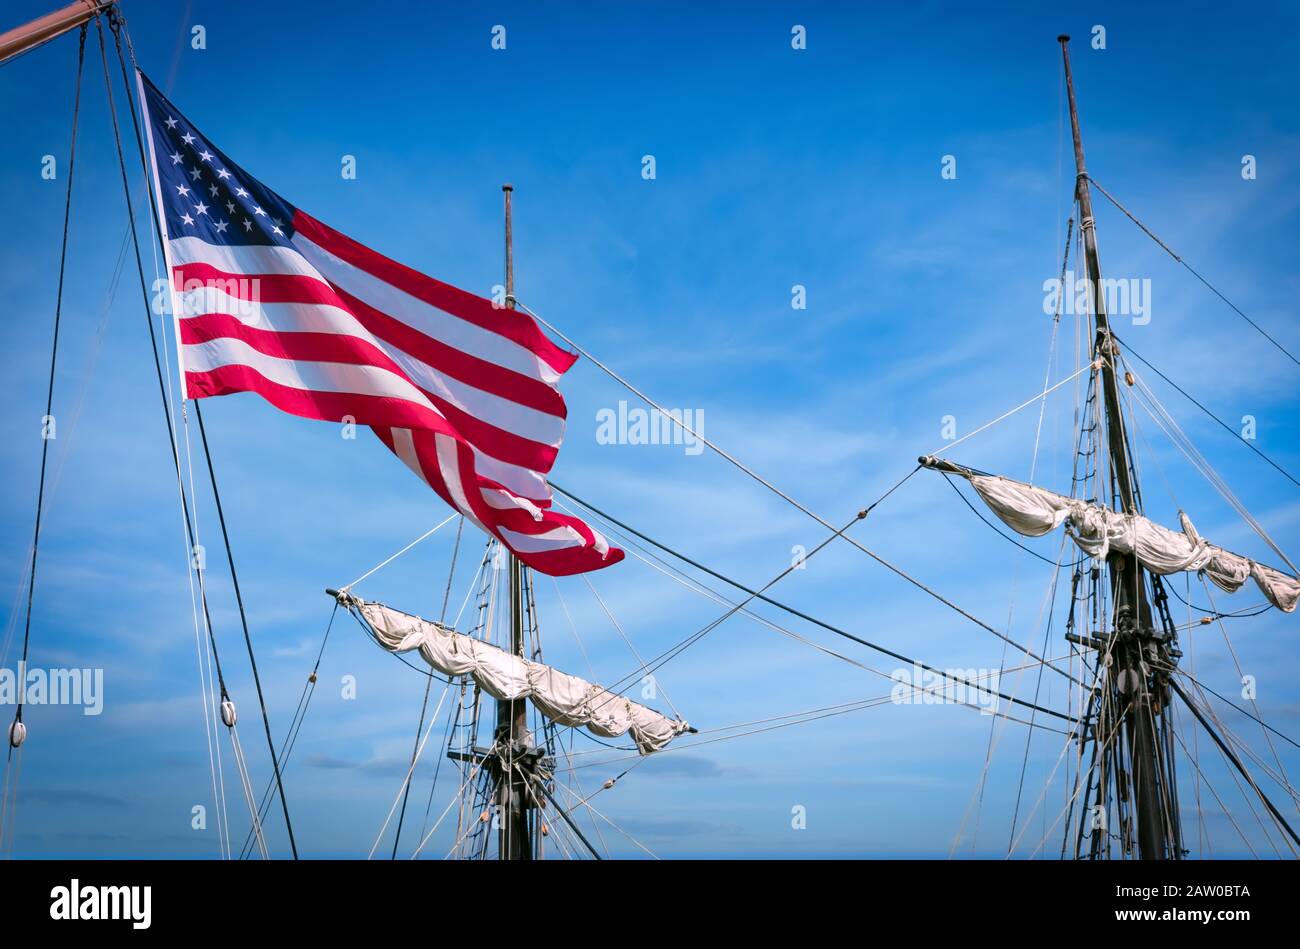 The American flag blows in the wind with ship masts and sails in the background. Stock Photo